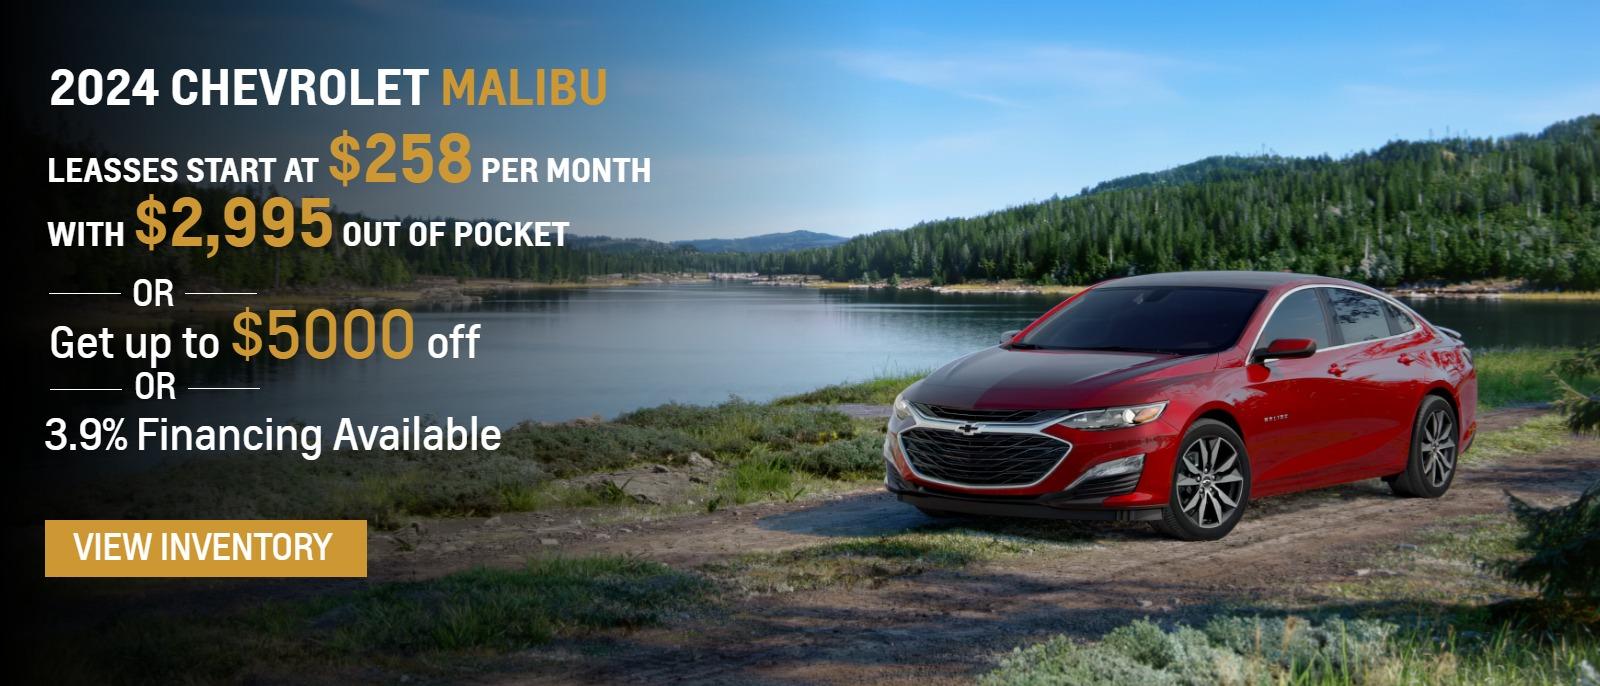 2024 Chevrolet Malibu
Leasses Start at $258 per month with $2995 out of pocket ***
Get up to $5000 off *
3.9% Financing Available**